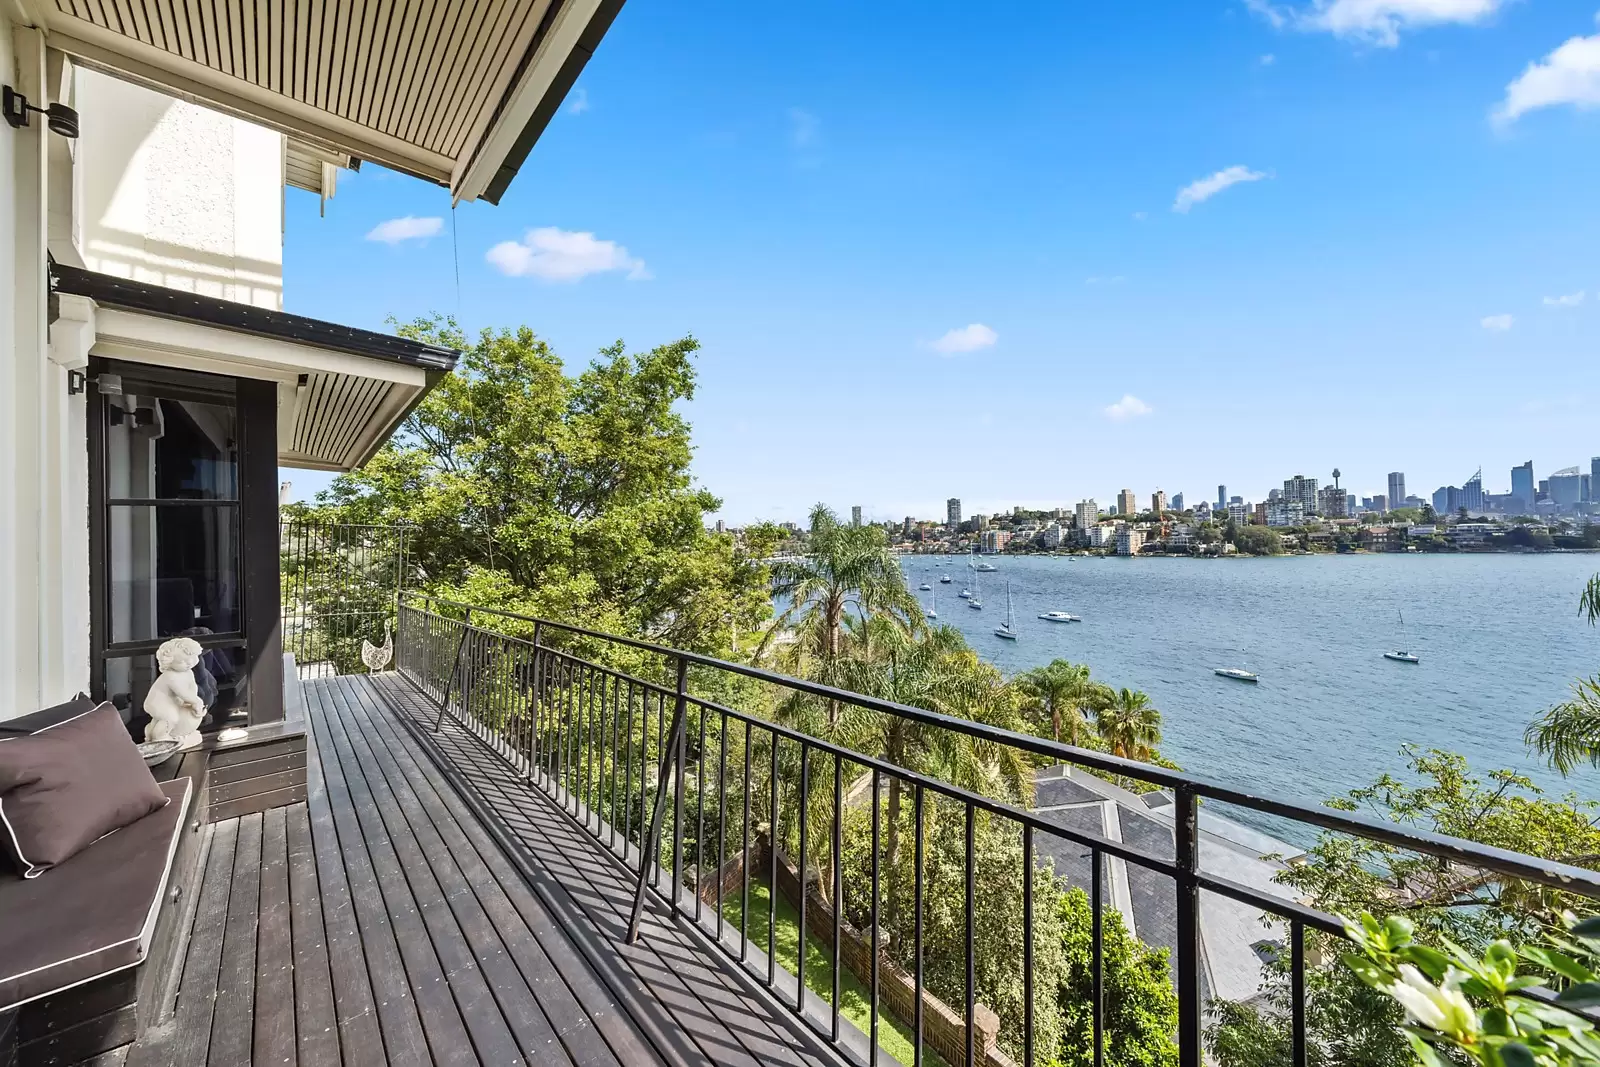 Photo #7: 3/66 Wolseley Road, Point Piper - Sold by Sydney Sotheby's International Realty